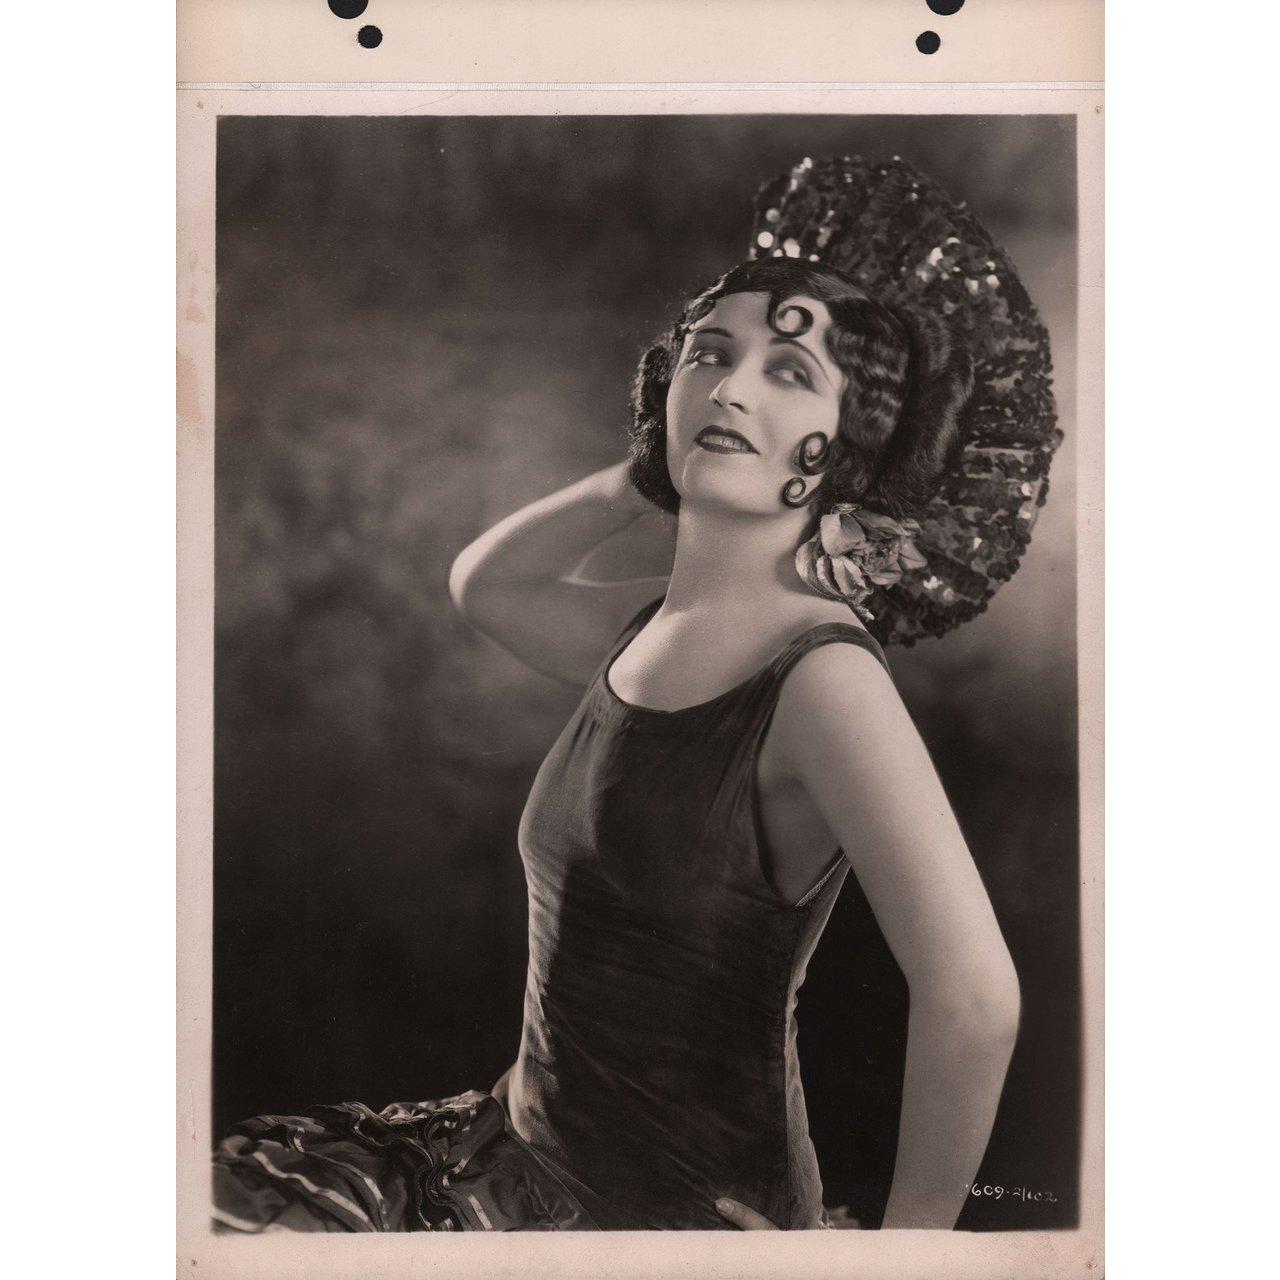 Original 1923 U.S. silver gelatin single-weight photo for the film The Spanish Dancer directed by Herbert Brenon with Pola Negri / Antonio Moreno / Wallace Beery / Kathlyn Williams. Fine condition, linen-backed. This photo has been professionally